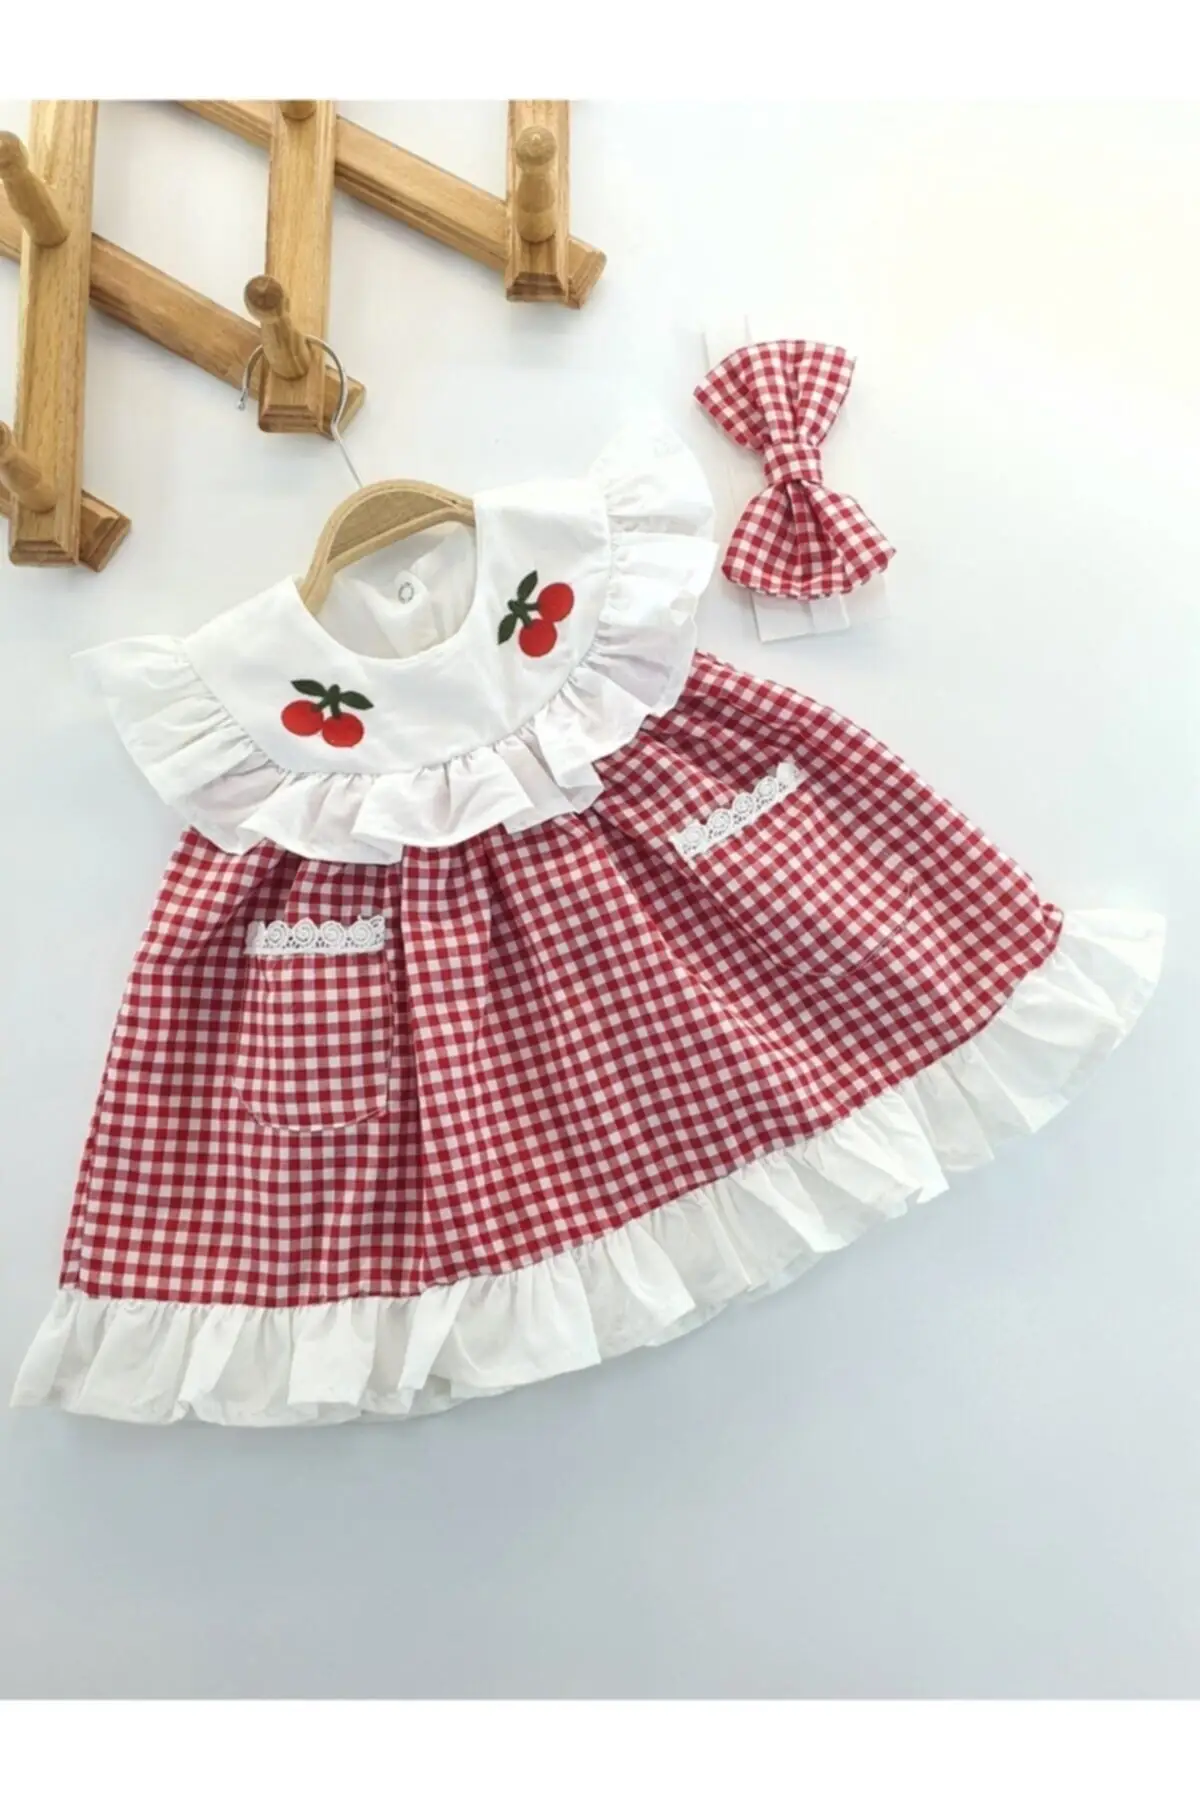 

Baby Girl Red Gingham Cherry Detailed Hairband Summer Dress Cotton Sleeveless Plaid/Checked Frill Couple